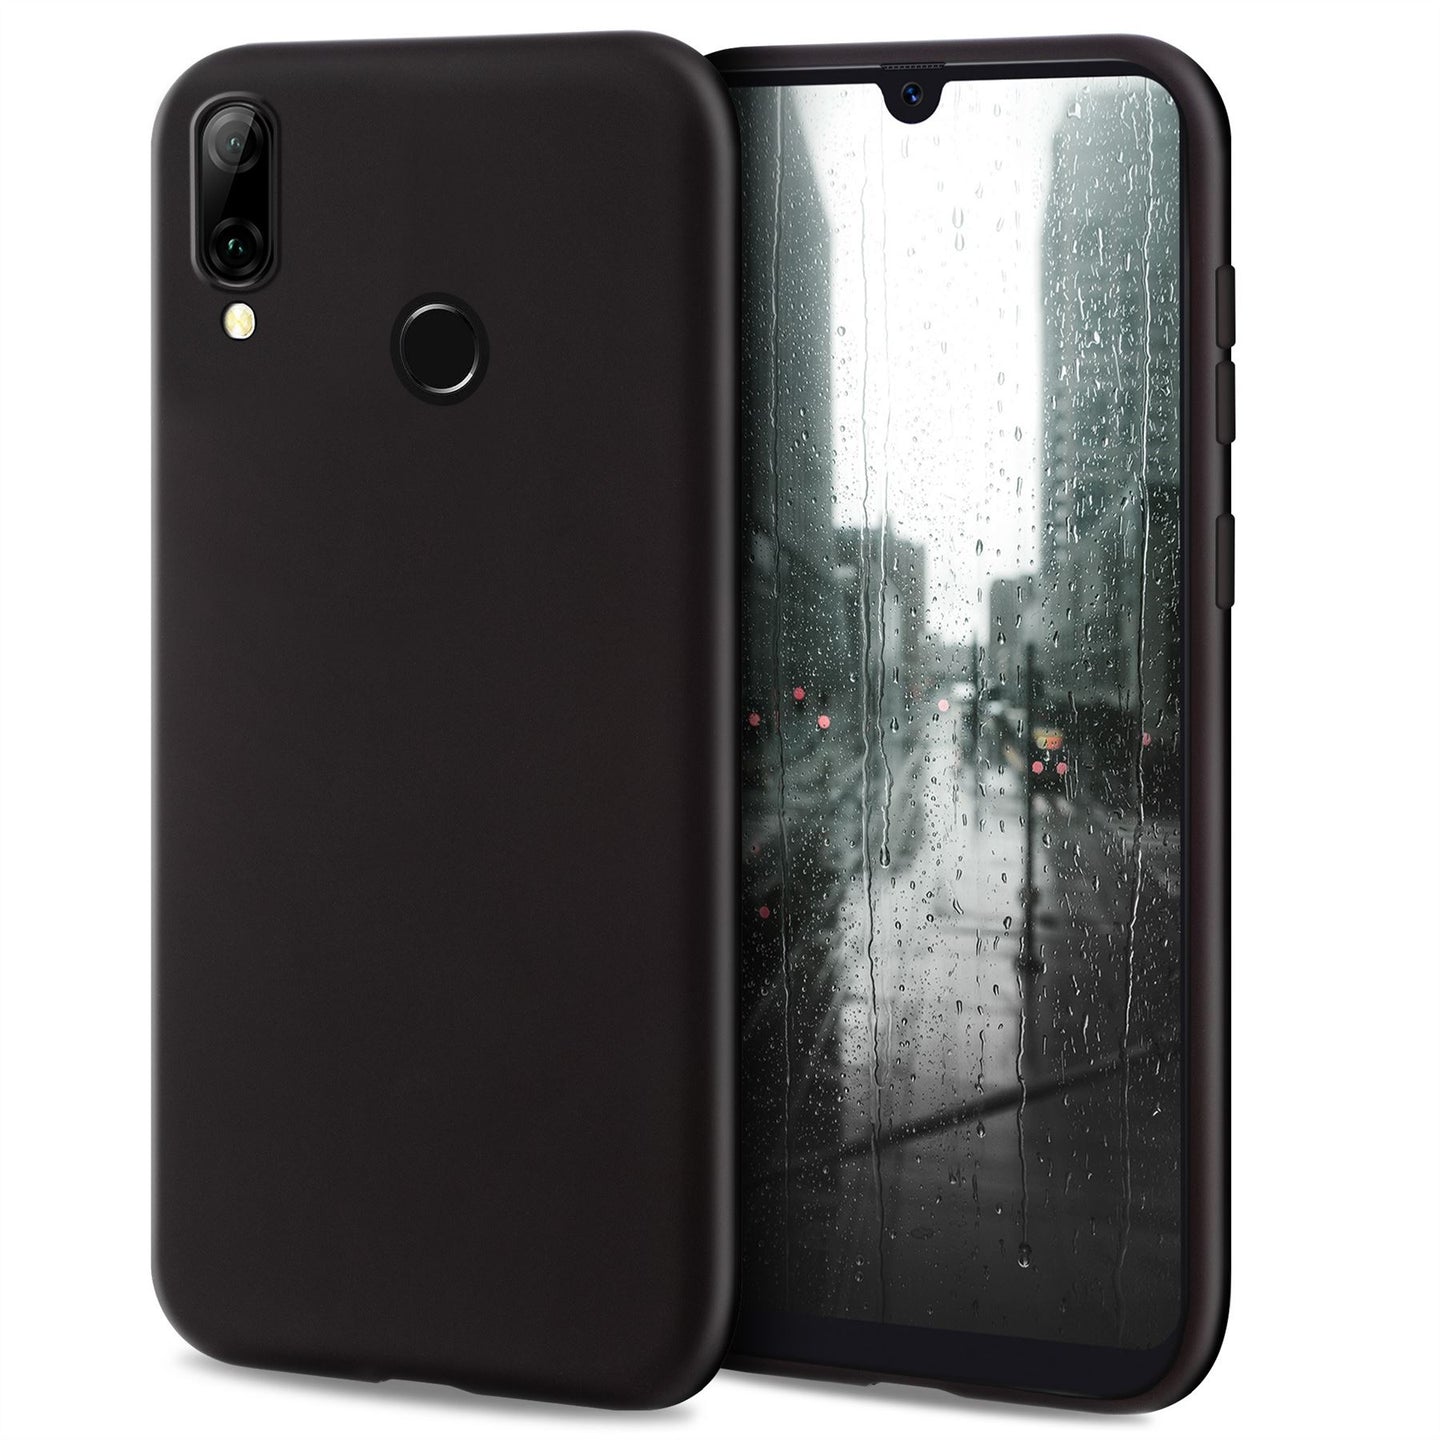 Moozy Minimalist Series Silicone Case for Huawei P Smart 2019 and Honor 10 Lite, Black - Matte Finish Slim Soft TPU Cover